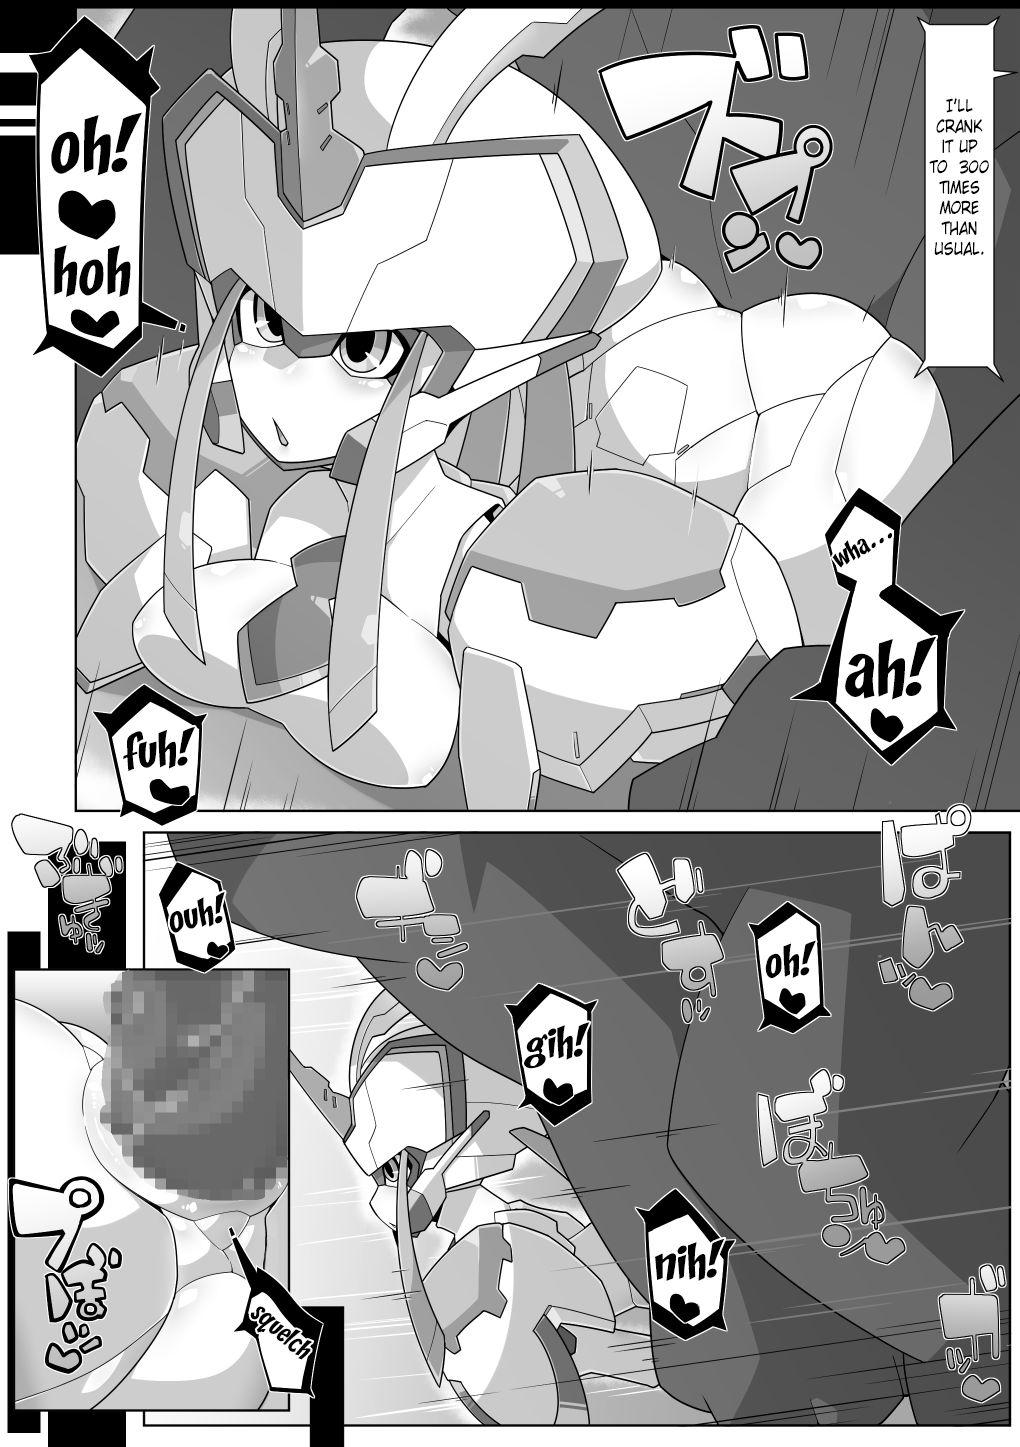 Lez Hardcore (C94) [Workaholic (Kni)] robo-hentai-book - Darling in the franxx Hogtied - Page 4